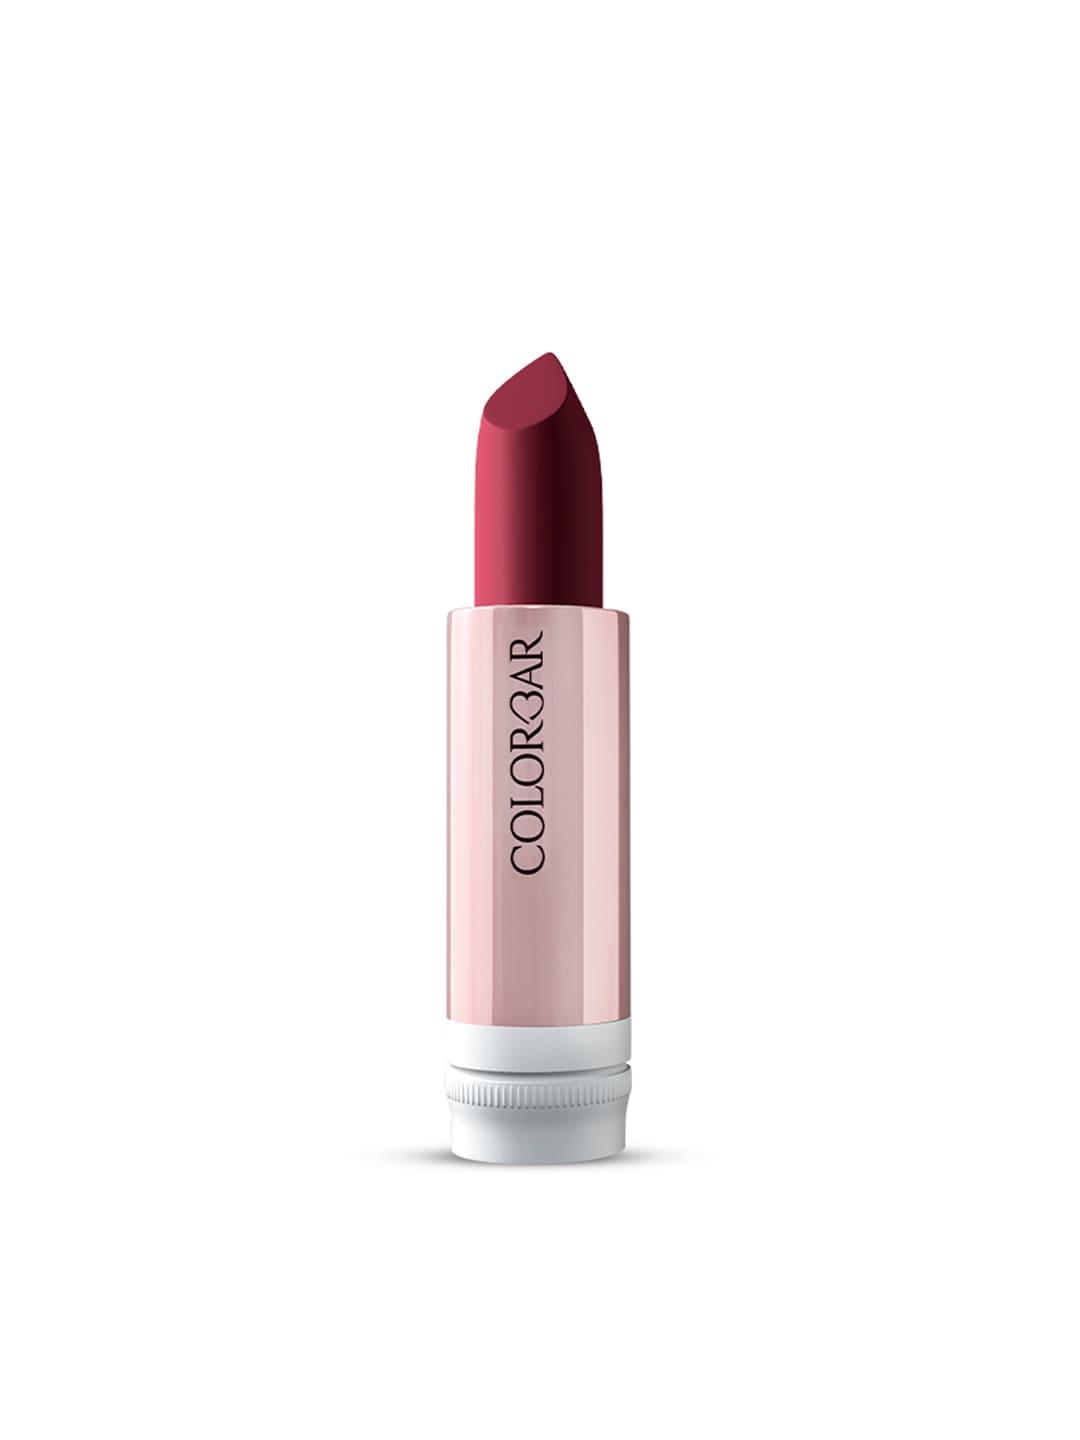 Colorbar Take Me As I Am Vegan Matte Lipstick Refill with Vitamin E - Marked 008